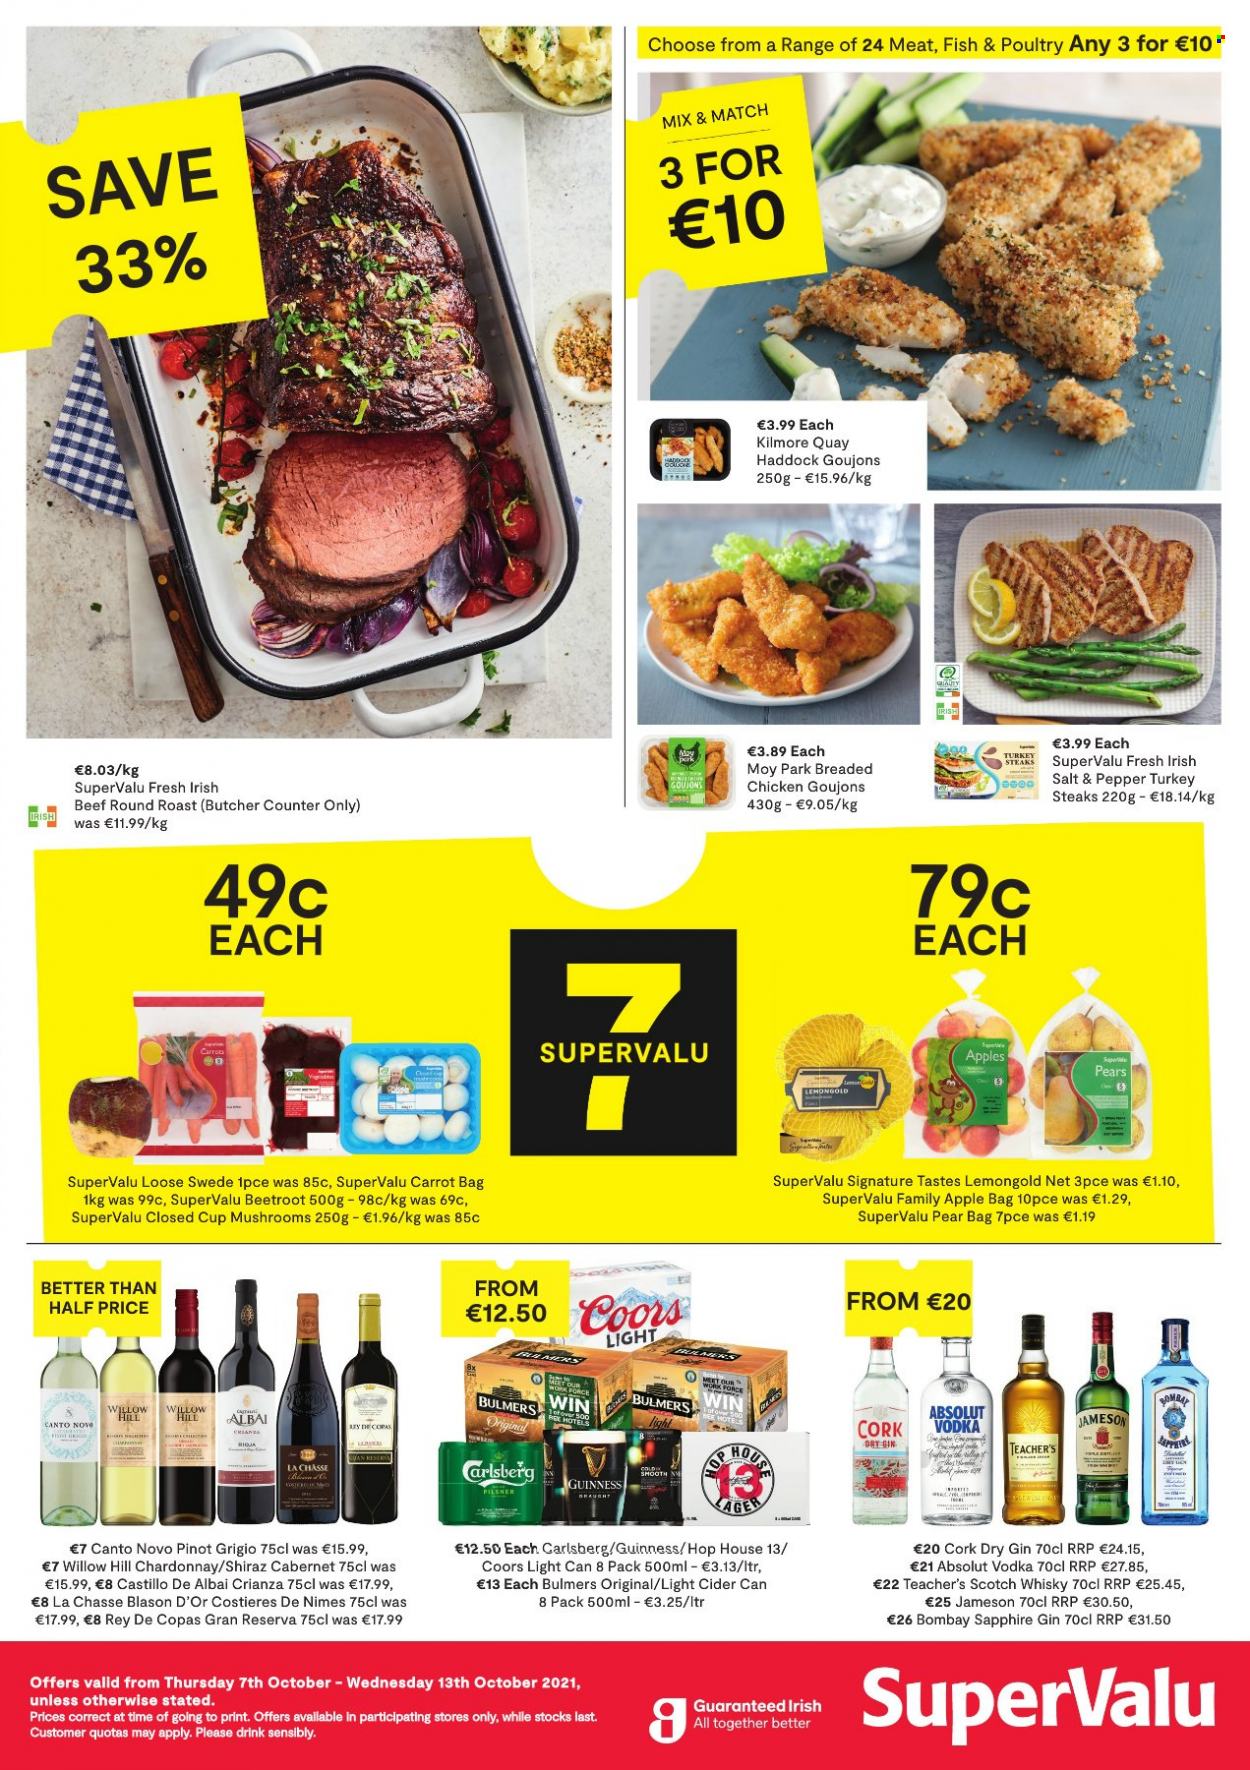 thumbnail - SuperValu offer  - 07.10.2021 - 13.10.2021 - Sales products - beetroot, pears, apples, haddock, fish, fried chicken, Cabernet Sauvignon, red wine, white wine, Chardonnay, Rey de Copas, Shiraz, Pinot Grigio, gin, vodka, Jameson, Absolut, scotch whisky, whisky, cider, beer, Bulmers, Carlsberg, Guinness, beef meat, steak, round roast, Coors. Page 1.